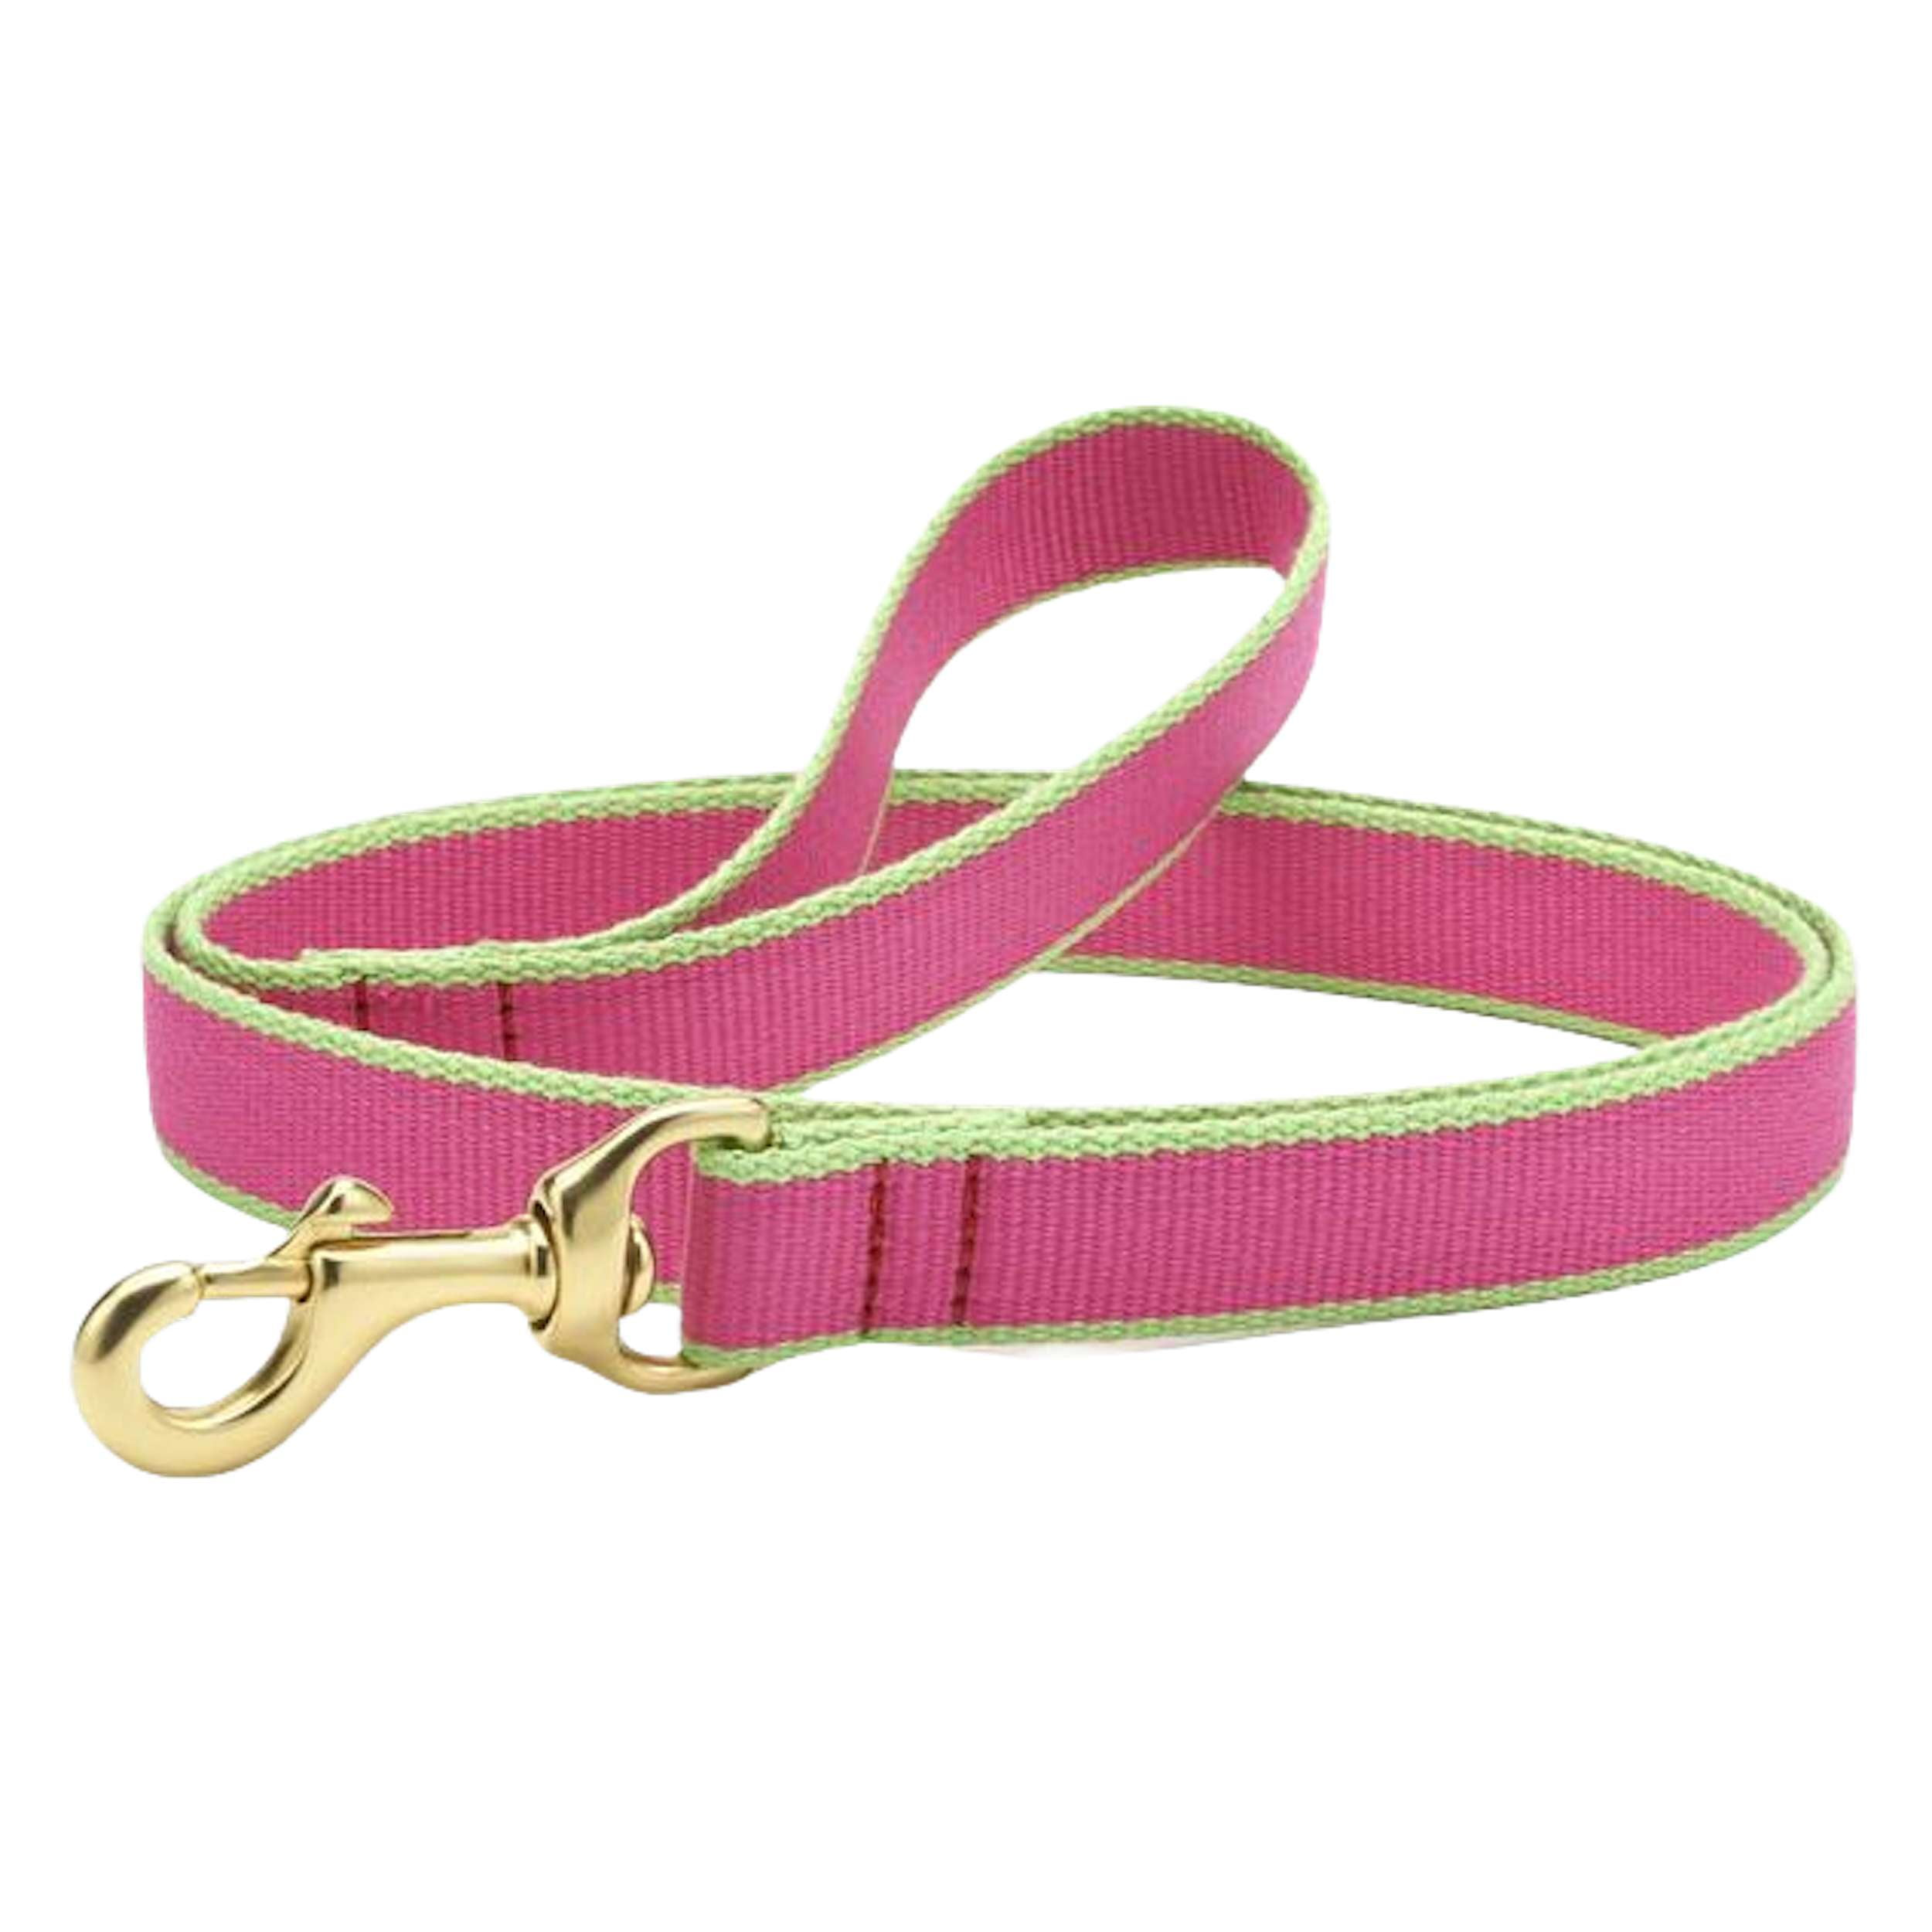 BRIGHT-PINK-LIME-DOG-LEASH